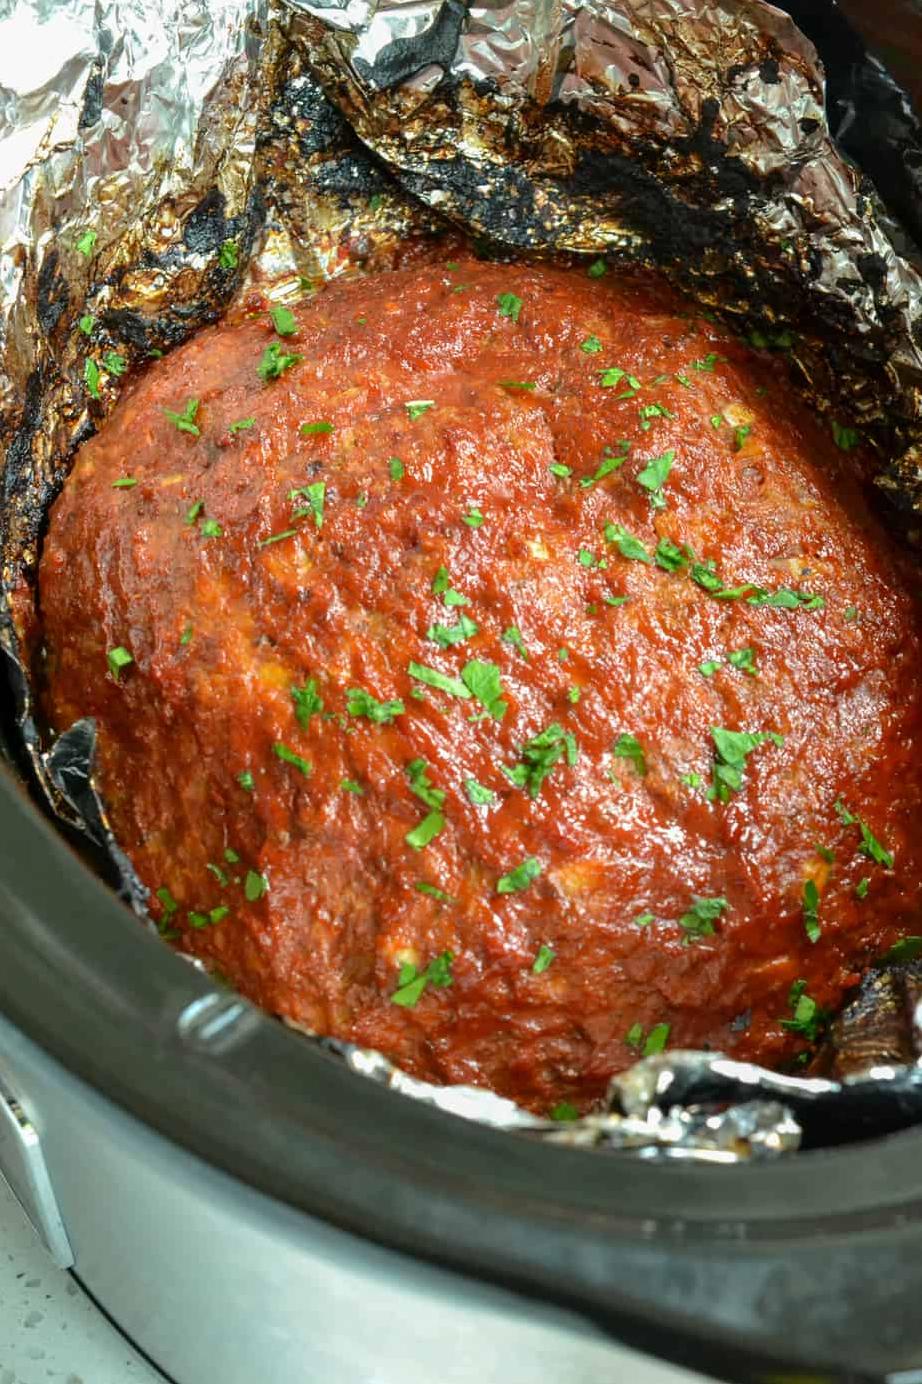  Get ready to turn your slow cooker into a meatloaf magic machine!